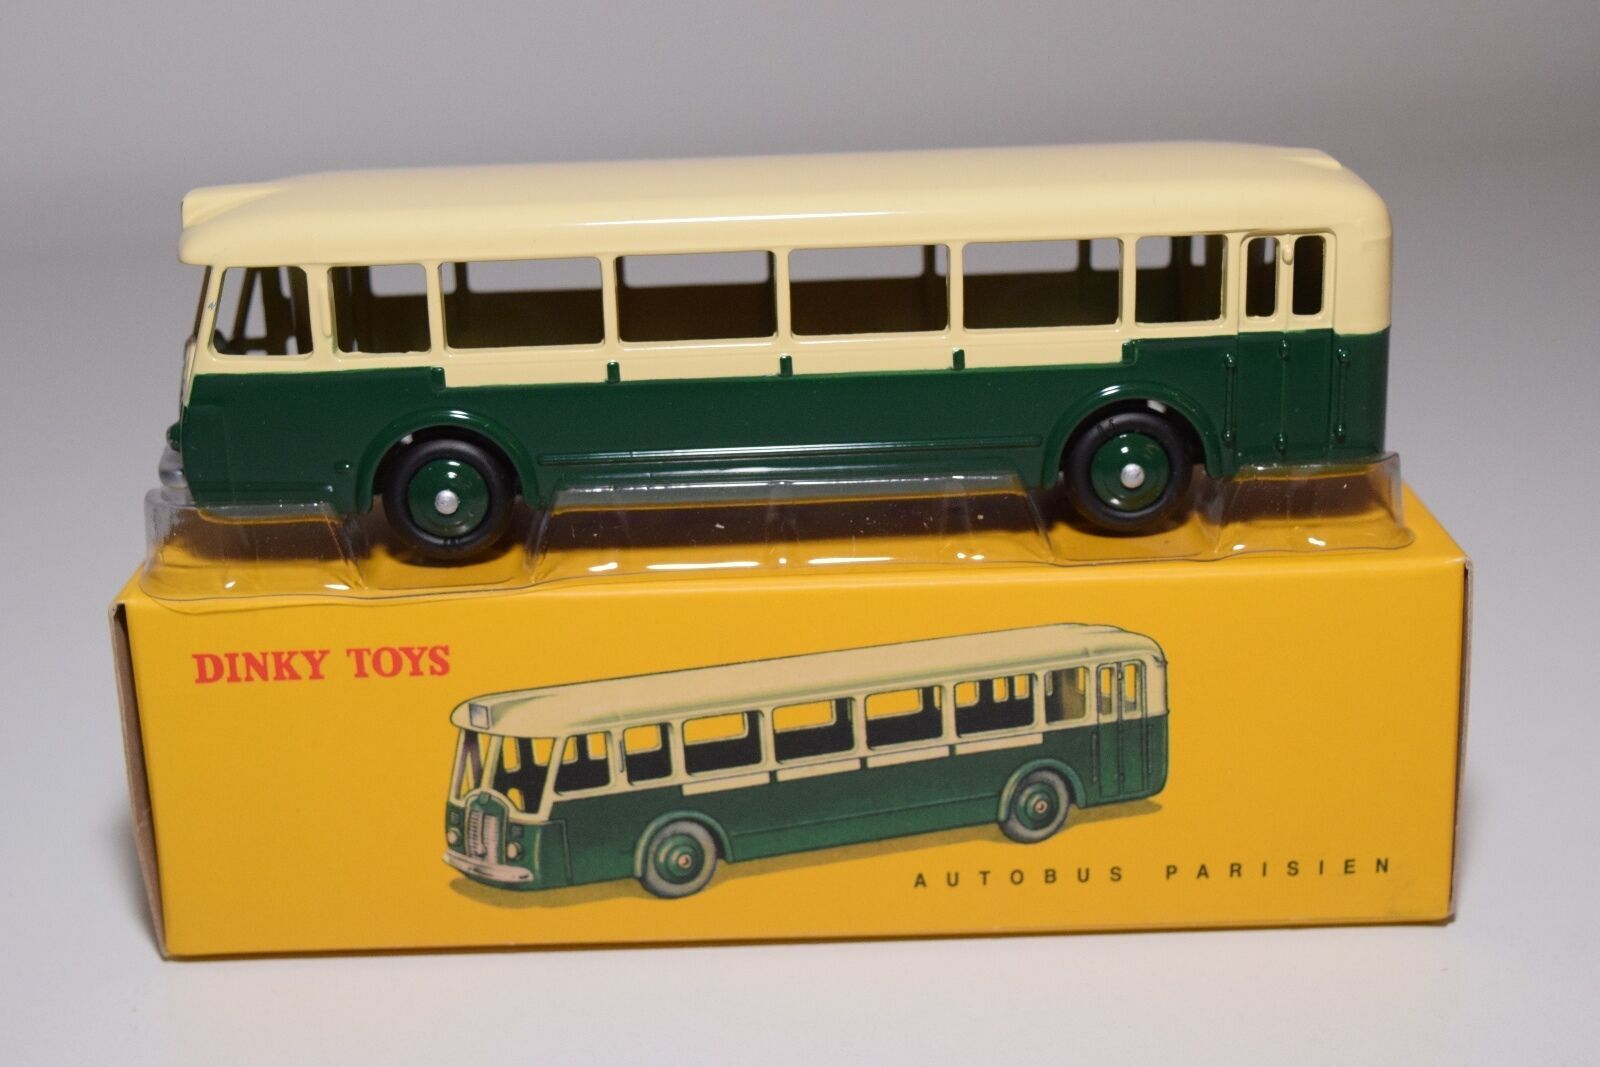 RARE DINKY TOYS PARISIEN BUS  MINT IN BOX SEALED